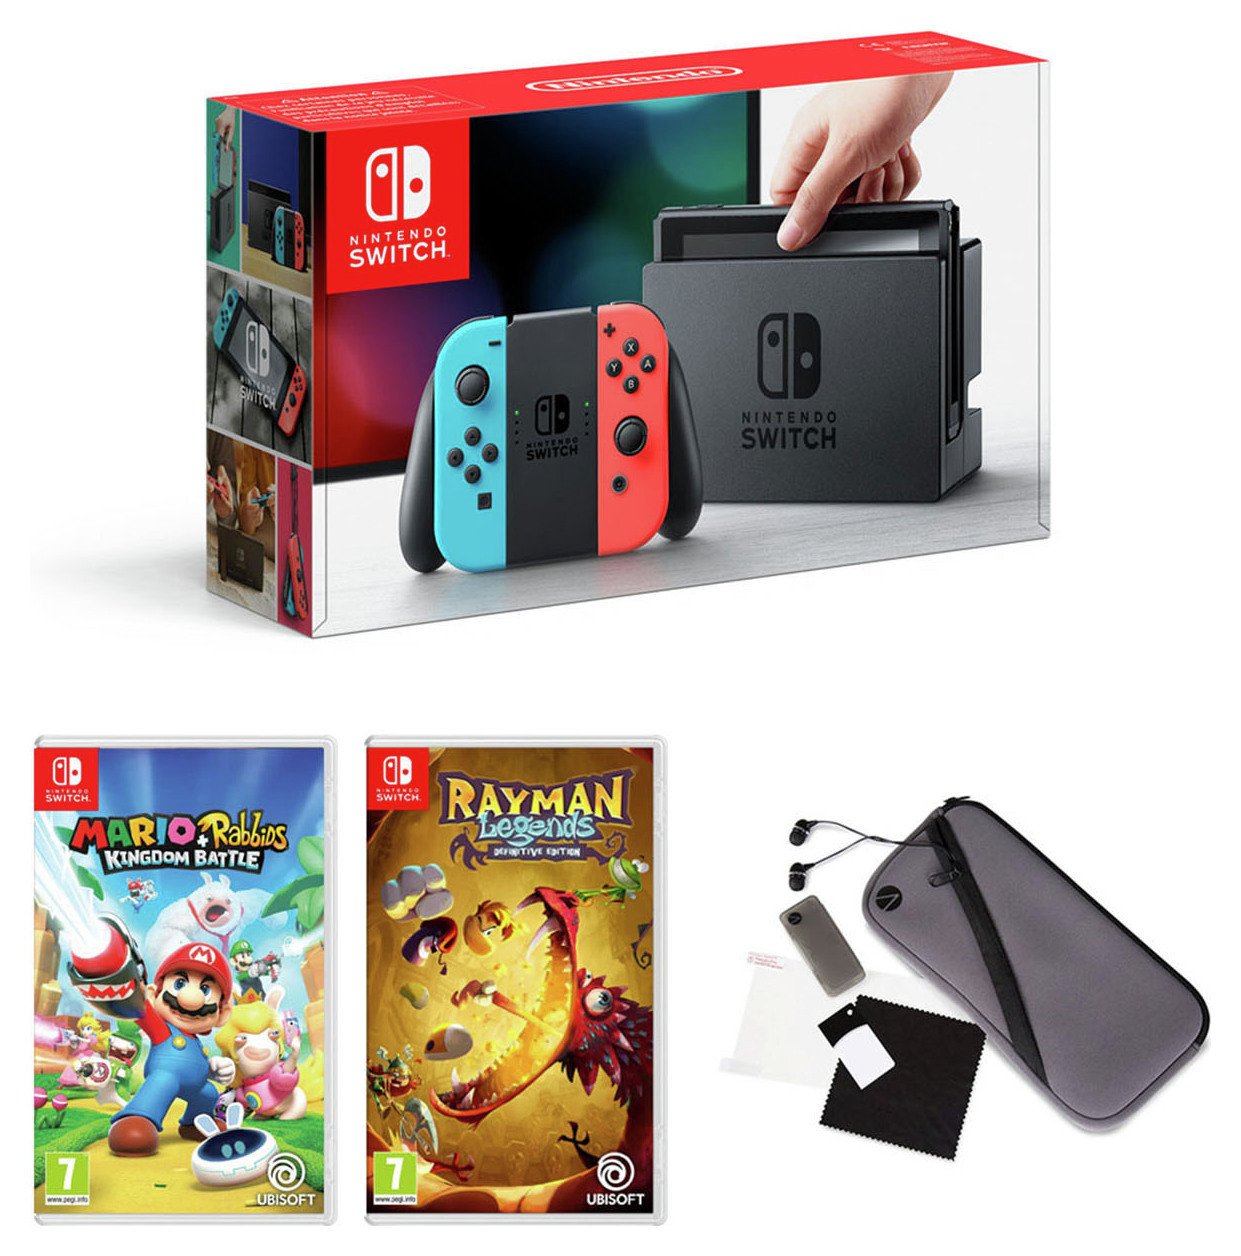 Nintendo Switch Neon Console with Rabbids & Rayman Bundle Review thumbnail